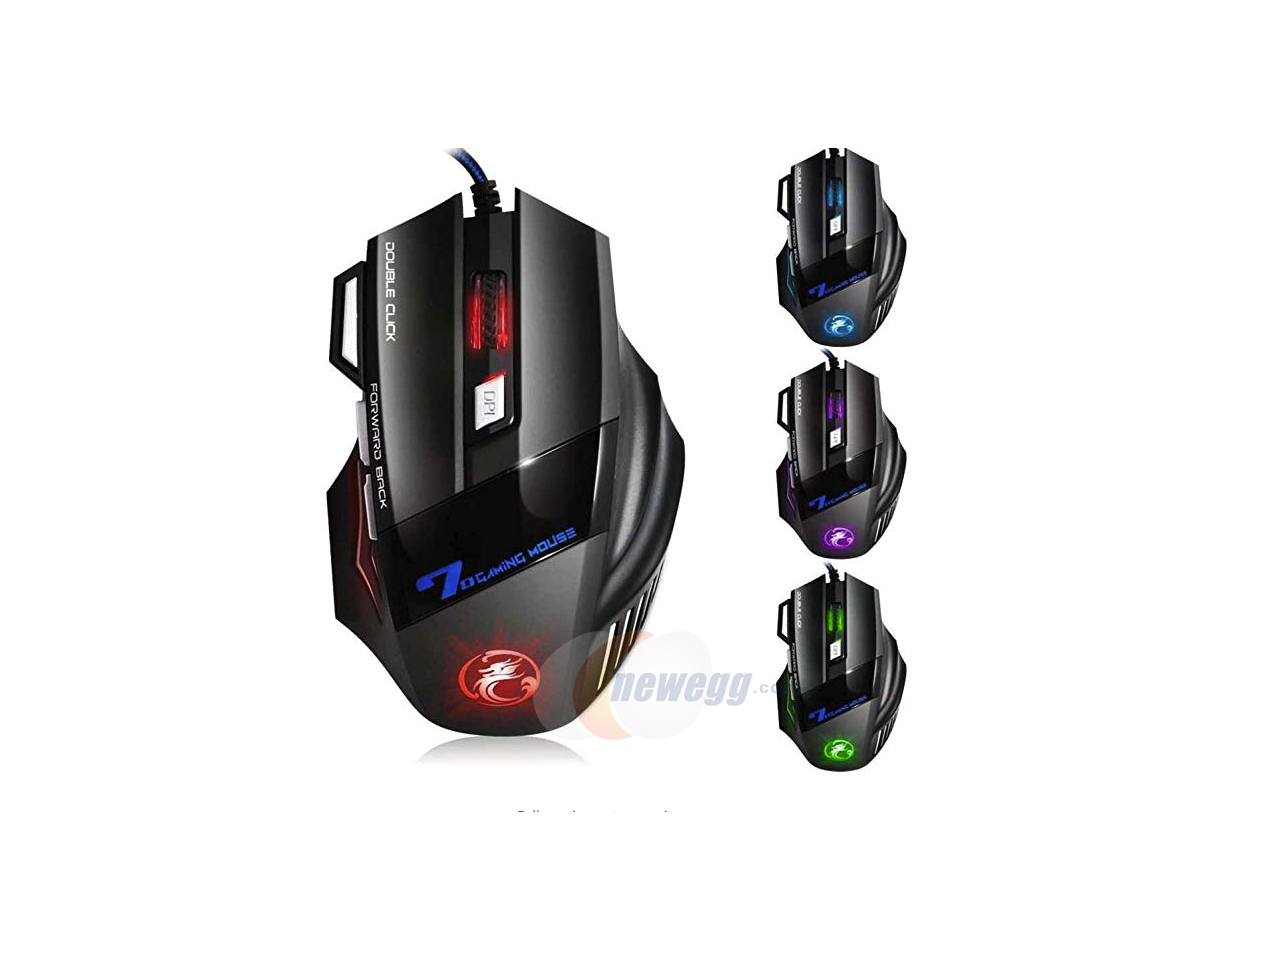 X7 7 LED Backlit Rechargeable 2.4GHz Wireless USB Optical Gaming Mouse Mice 